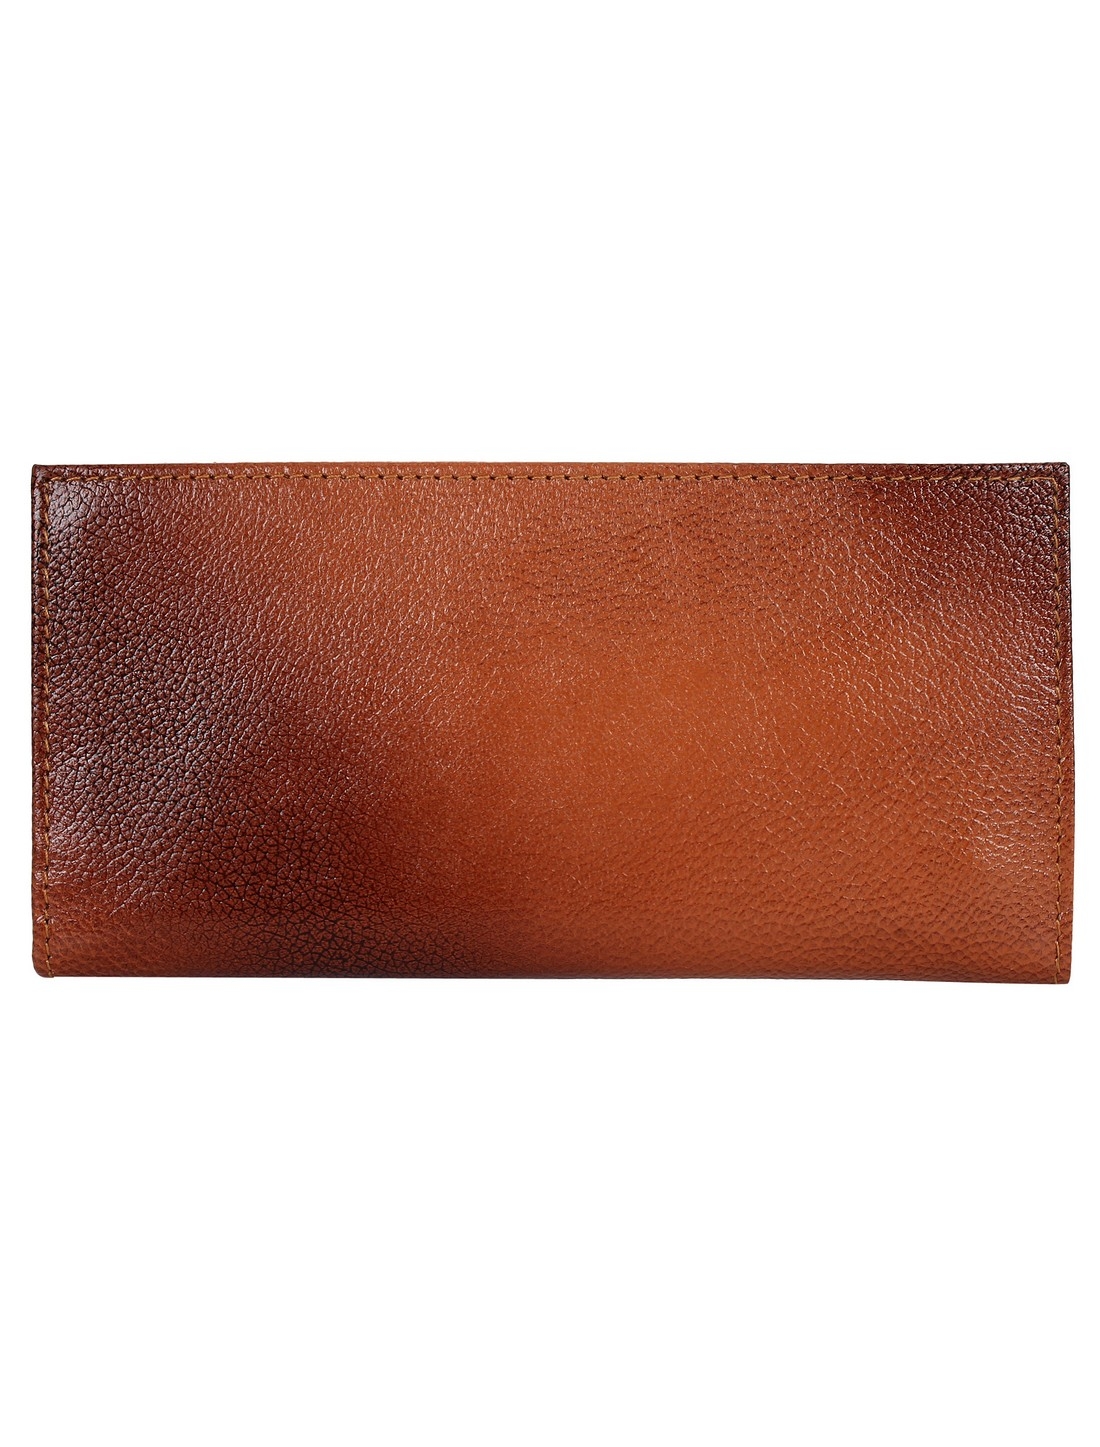 CREATURE | CREATURE Tan Stylish Genuine Leather Clutch for Women